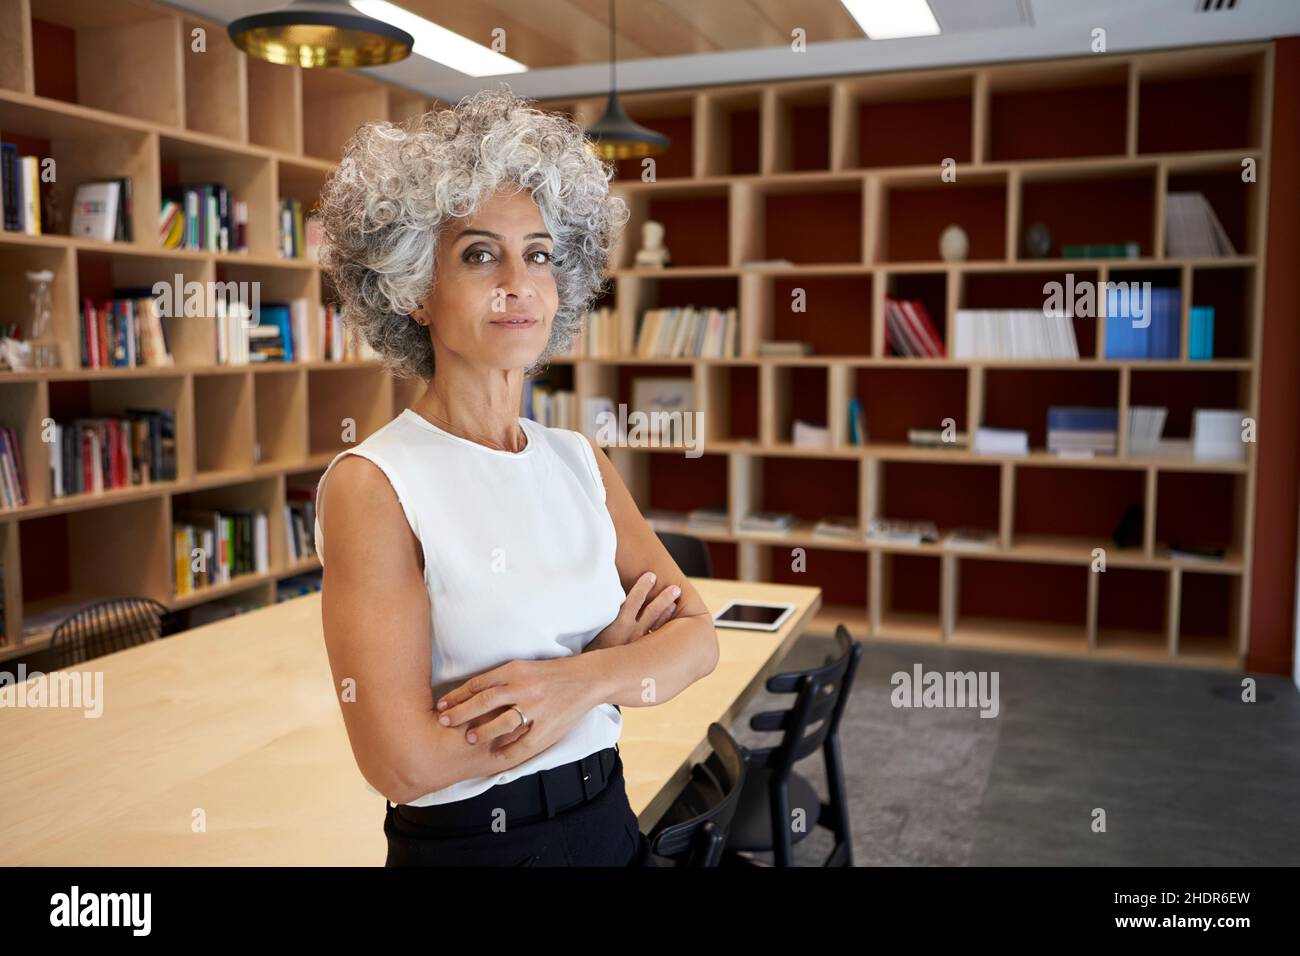 business woman, office, boss, business women, executive, executives, leader, leaders, manager, offices Stock Photo